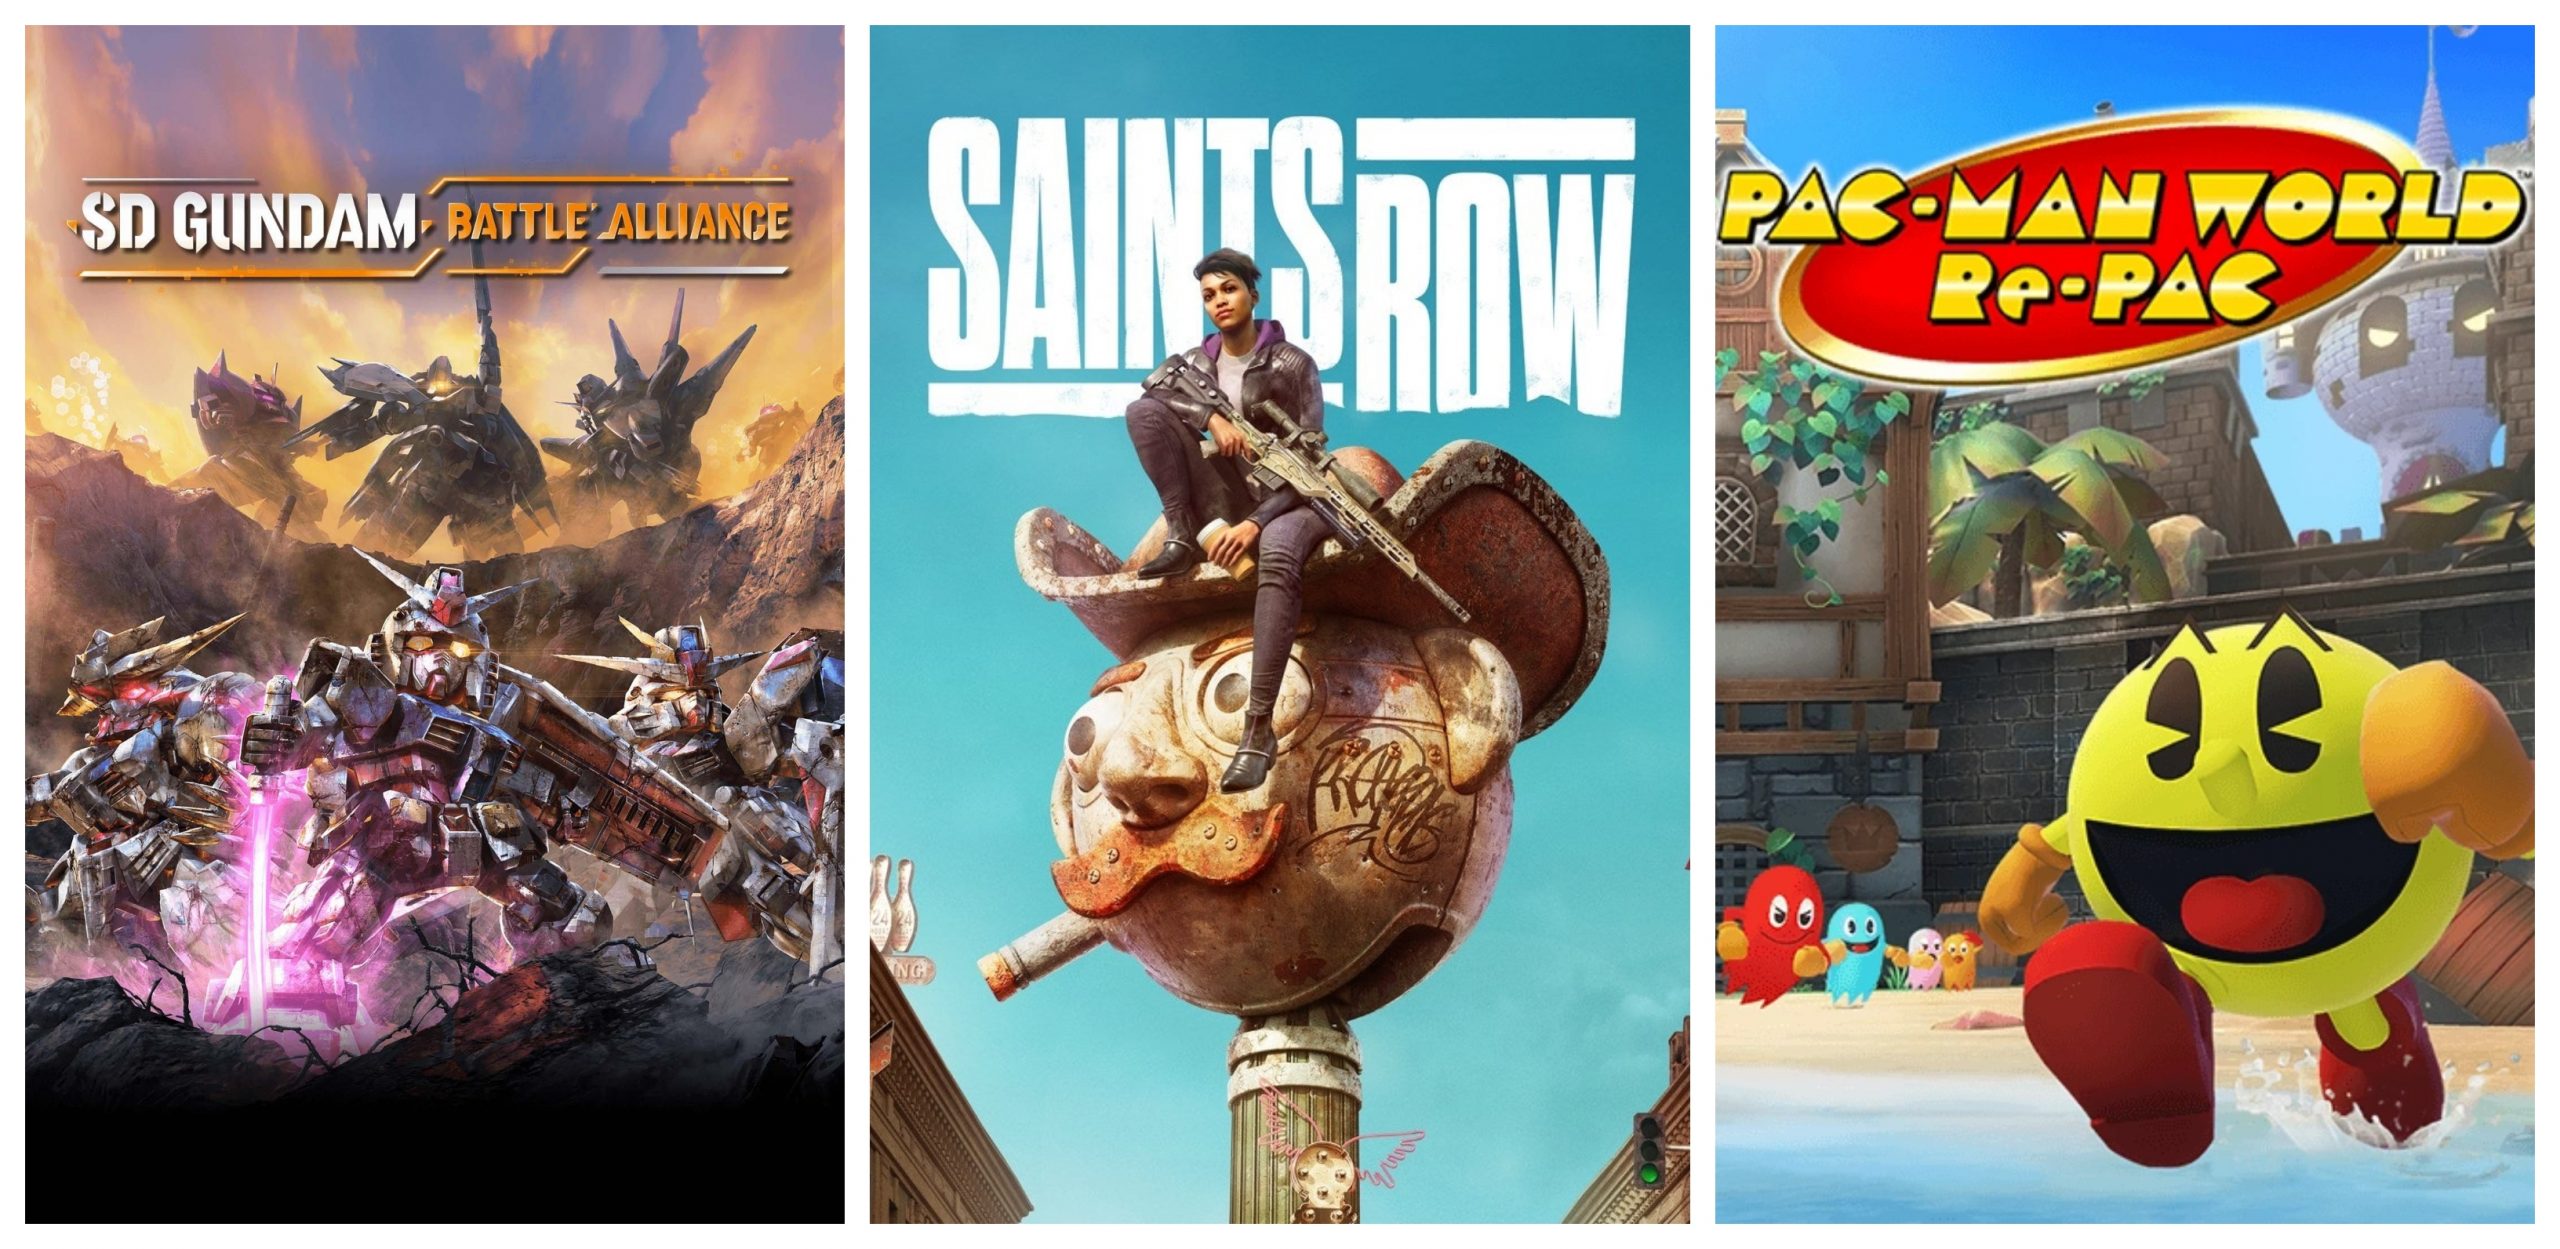 The biggest new video games releasing the week of 8/22/22